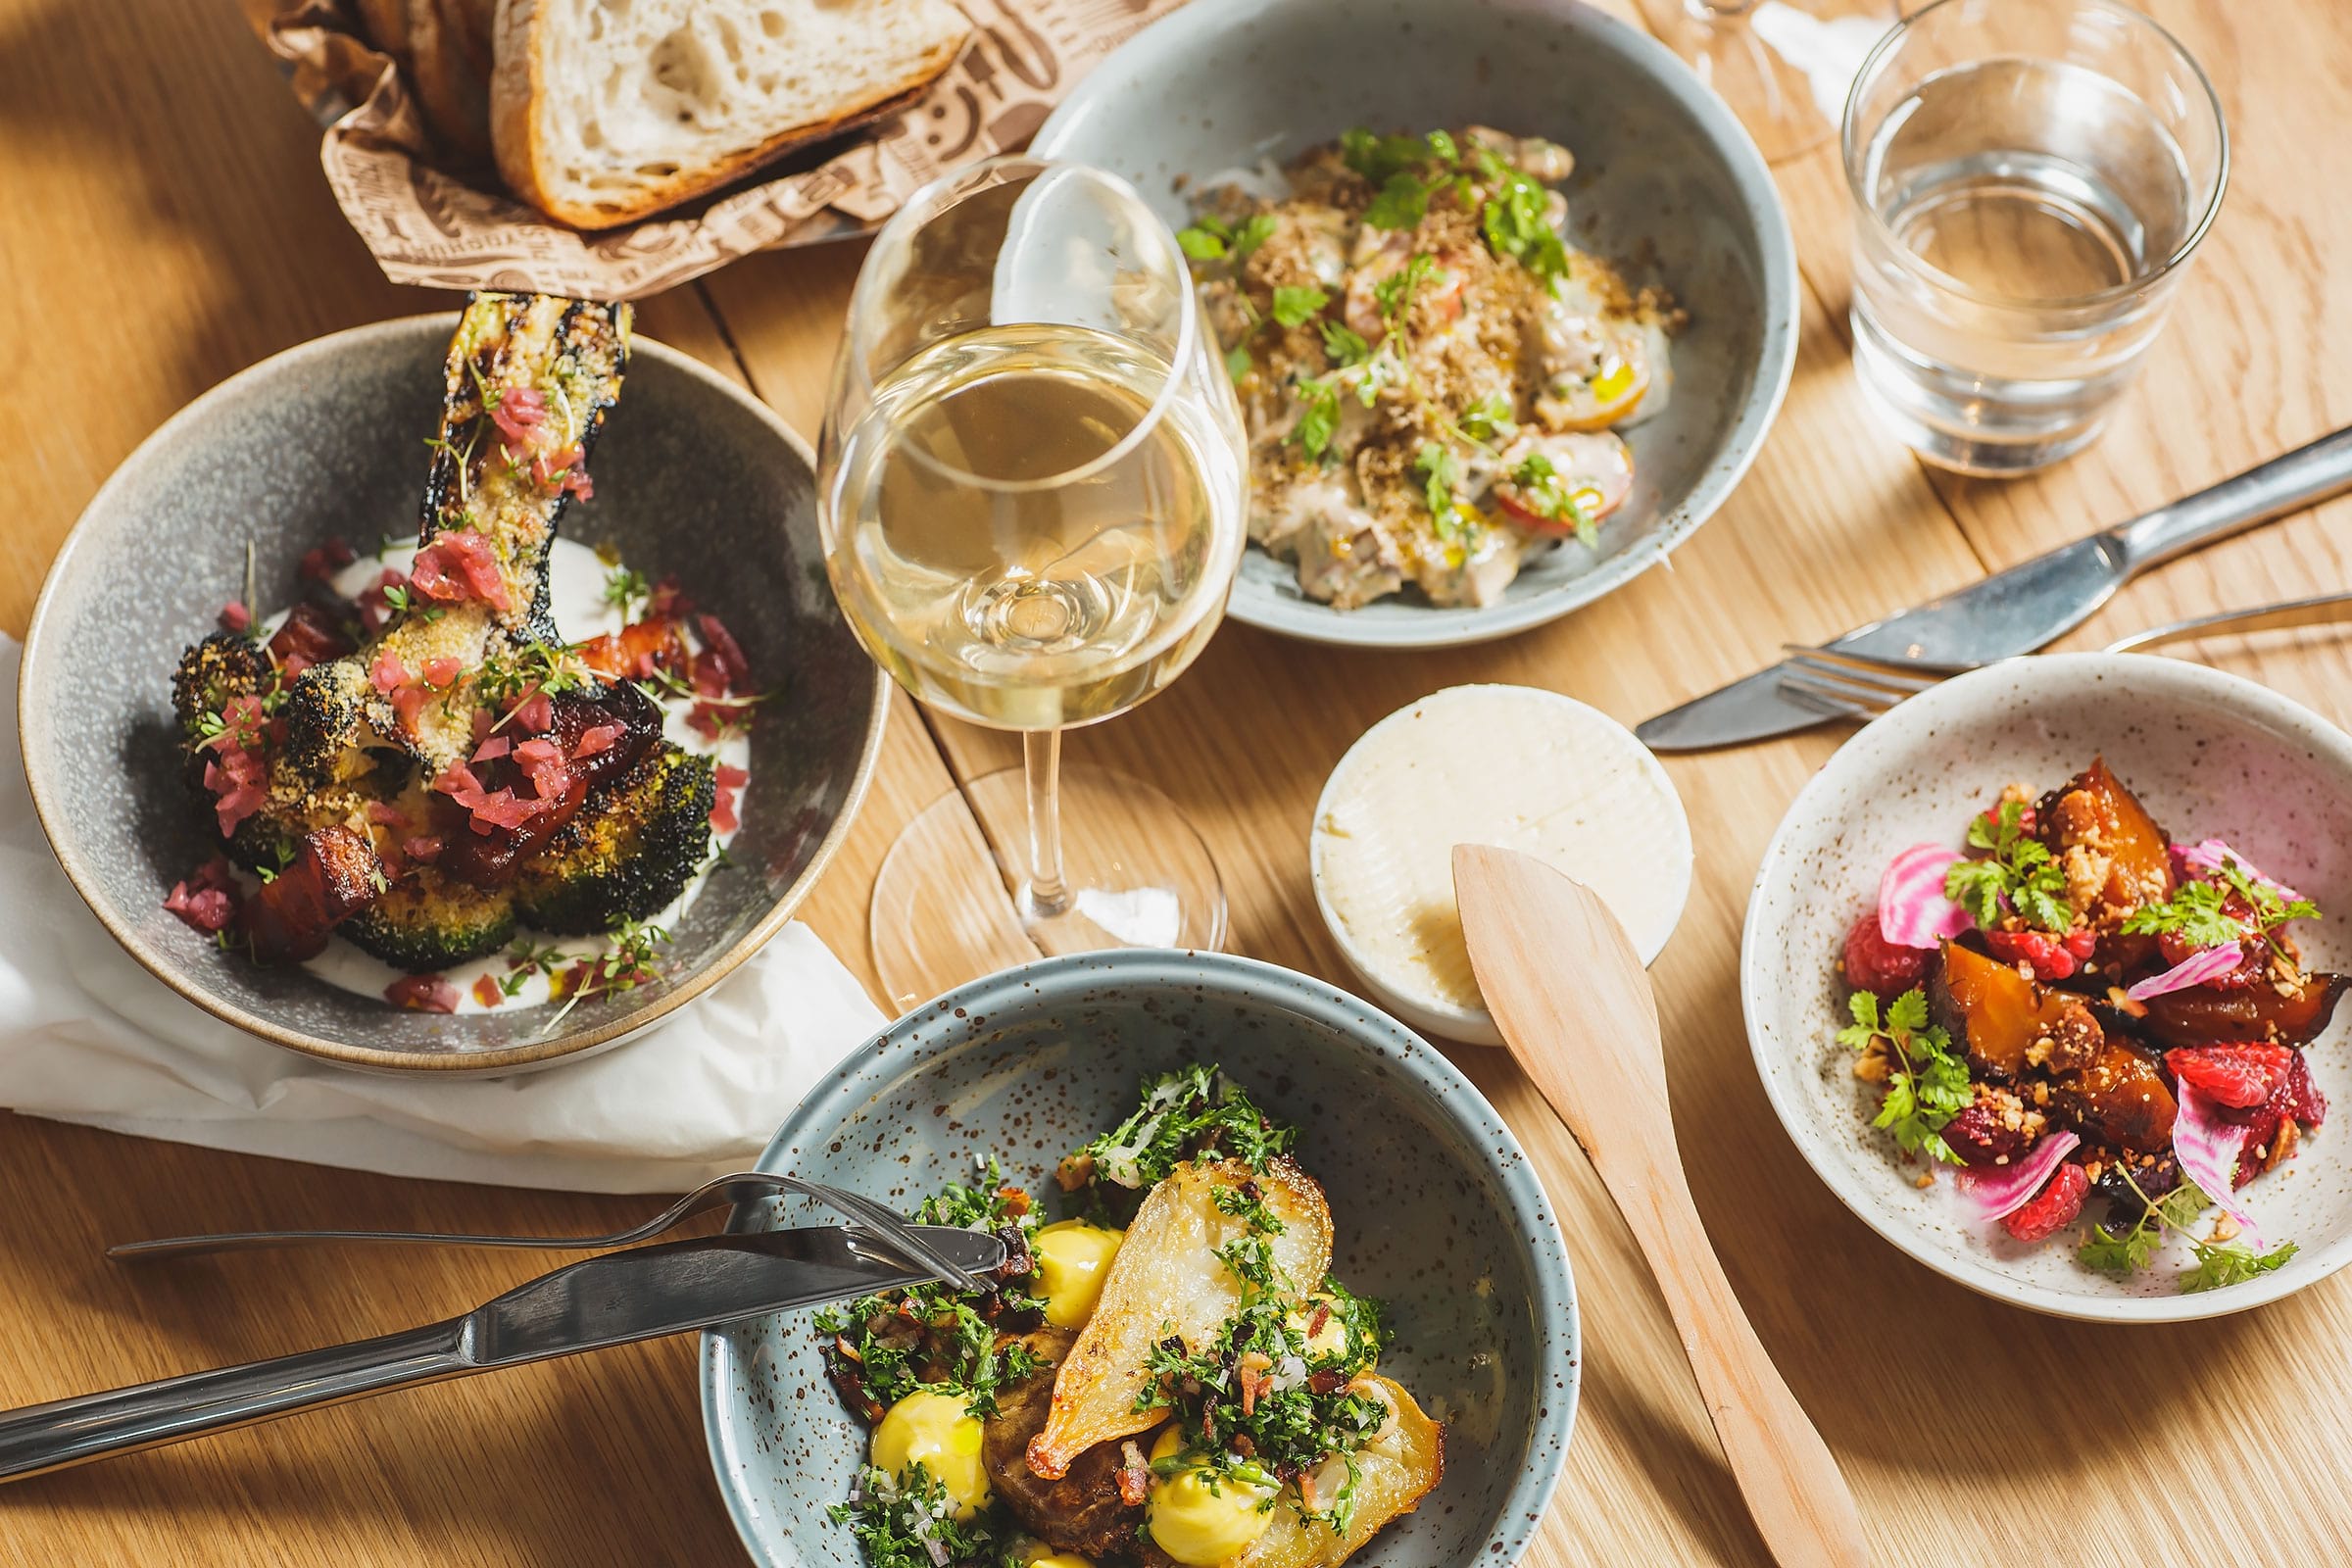 Stockholm restaurants with a focus on sustainability